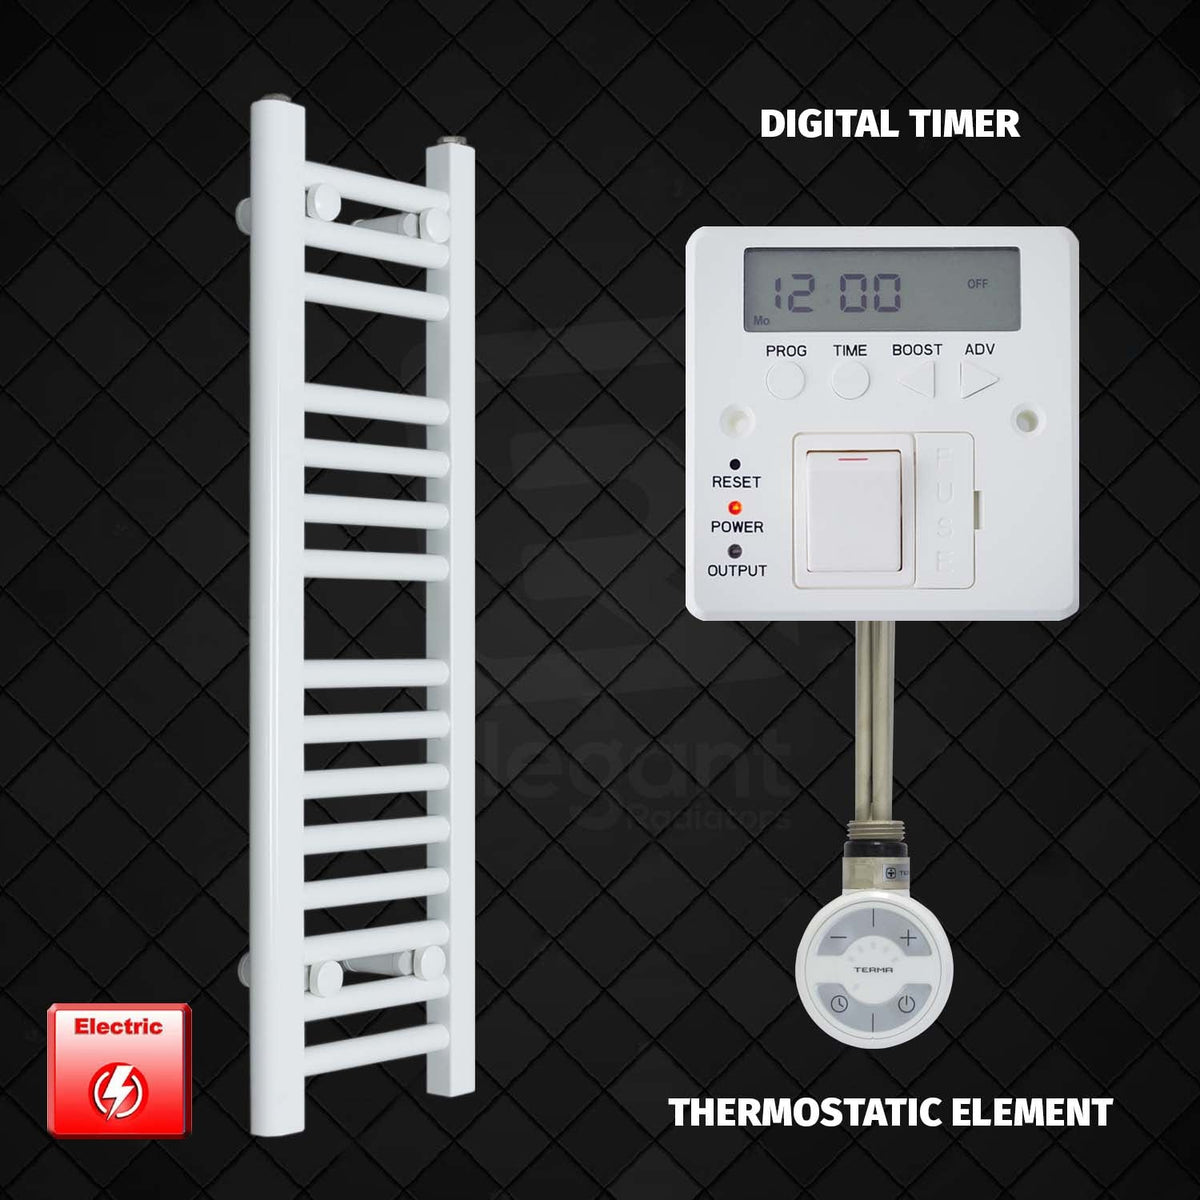 800 mm High 250 mm Wide Pre-Filled Electric Heated Towel Rail Radiator White HTR MOA Digital Timer Thermostatic Element